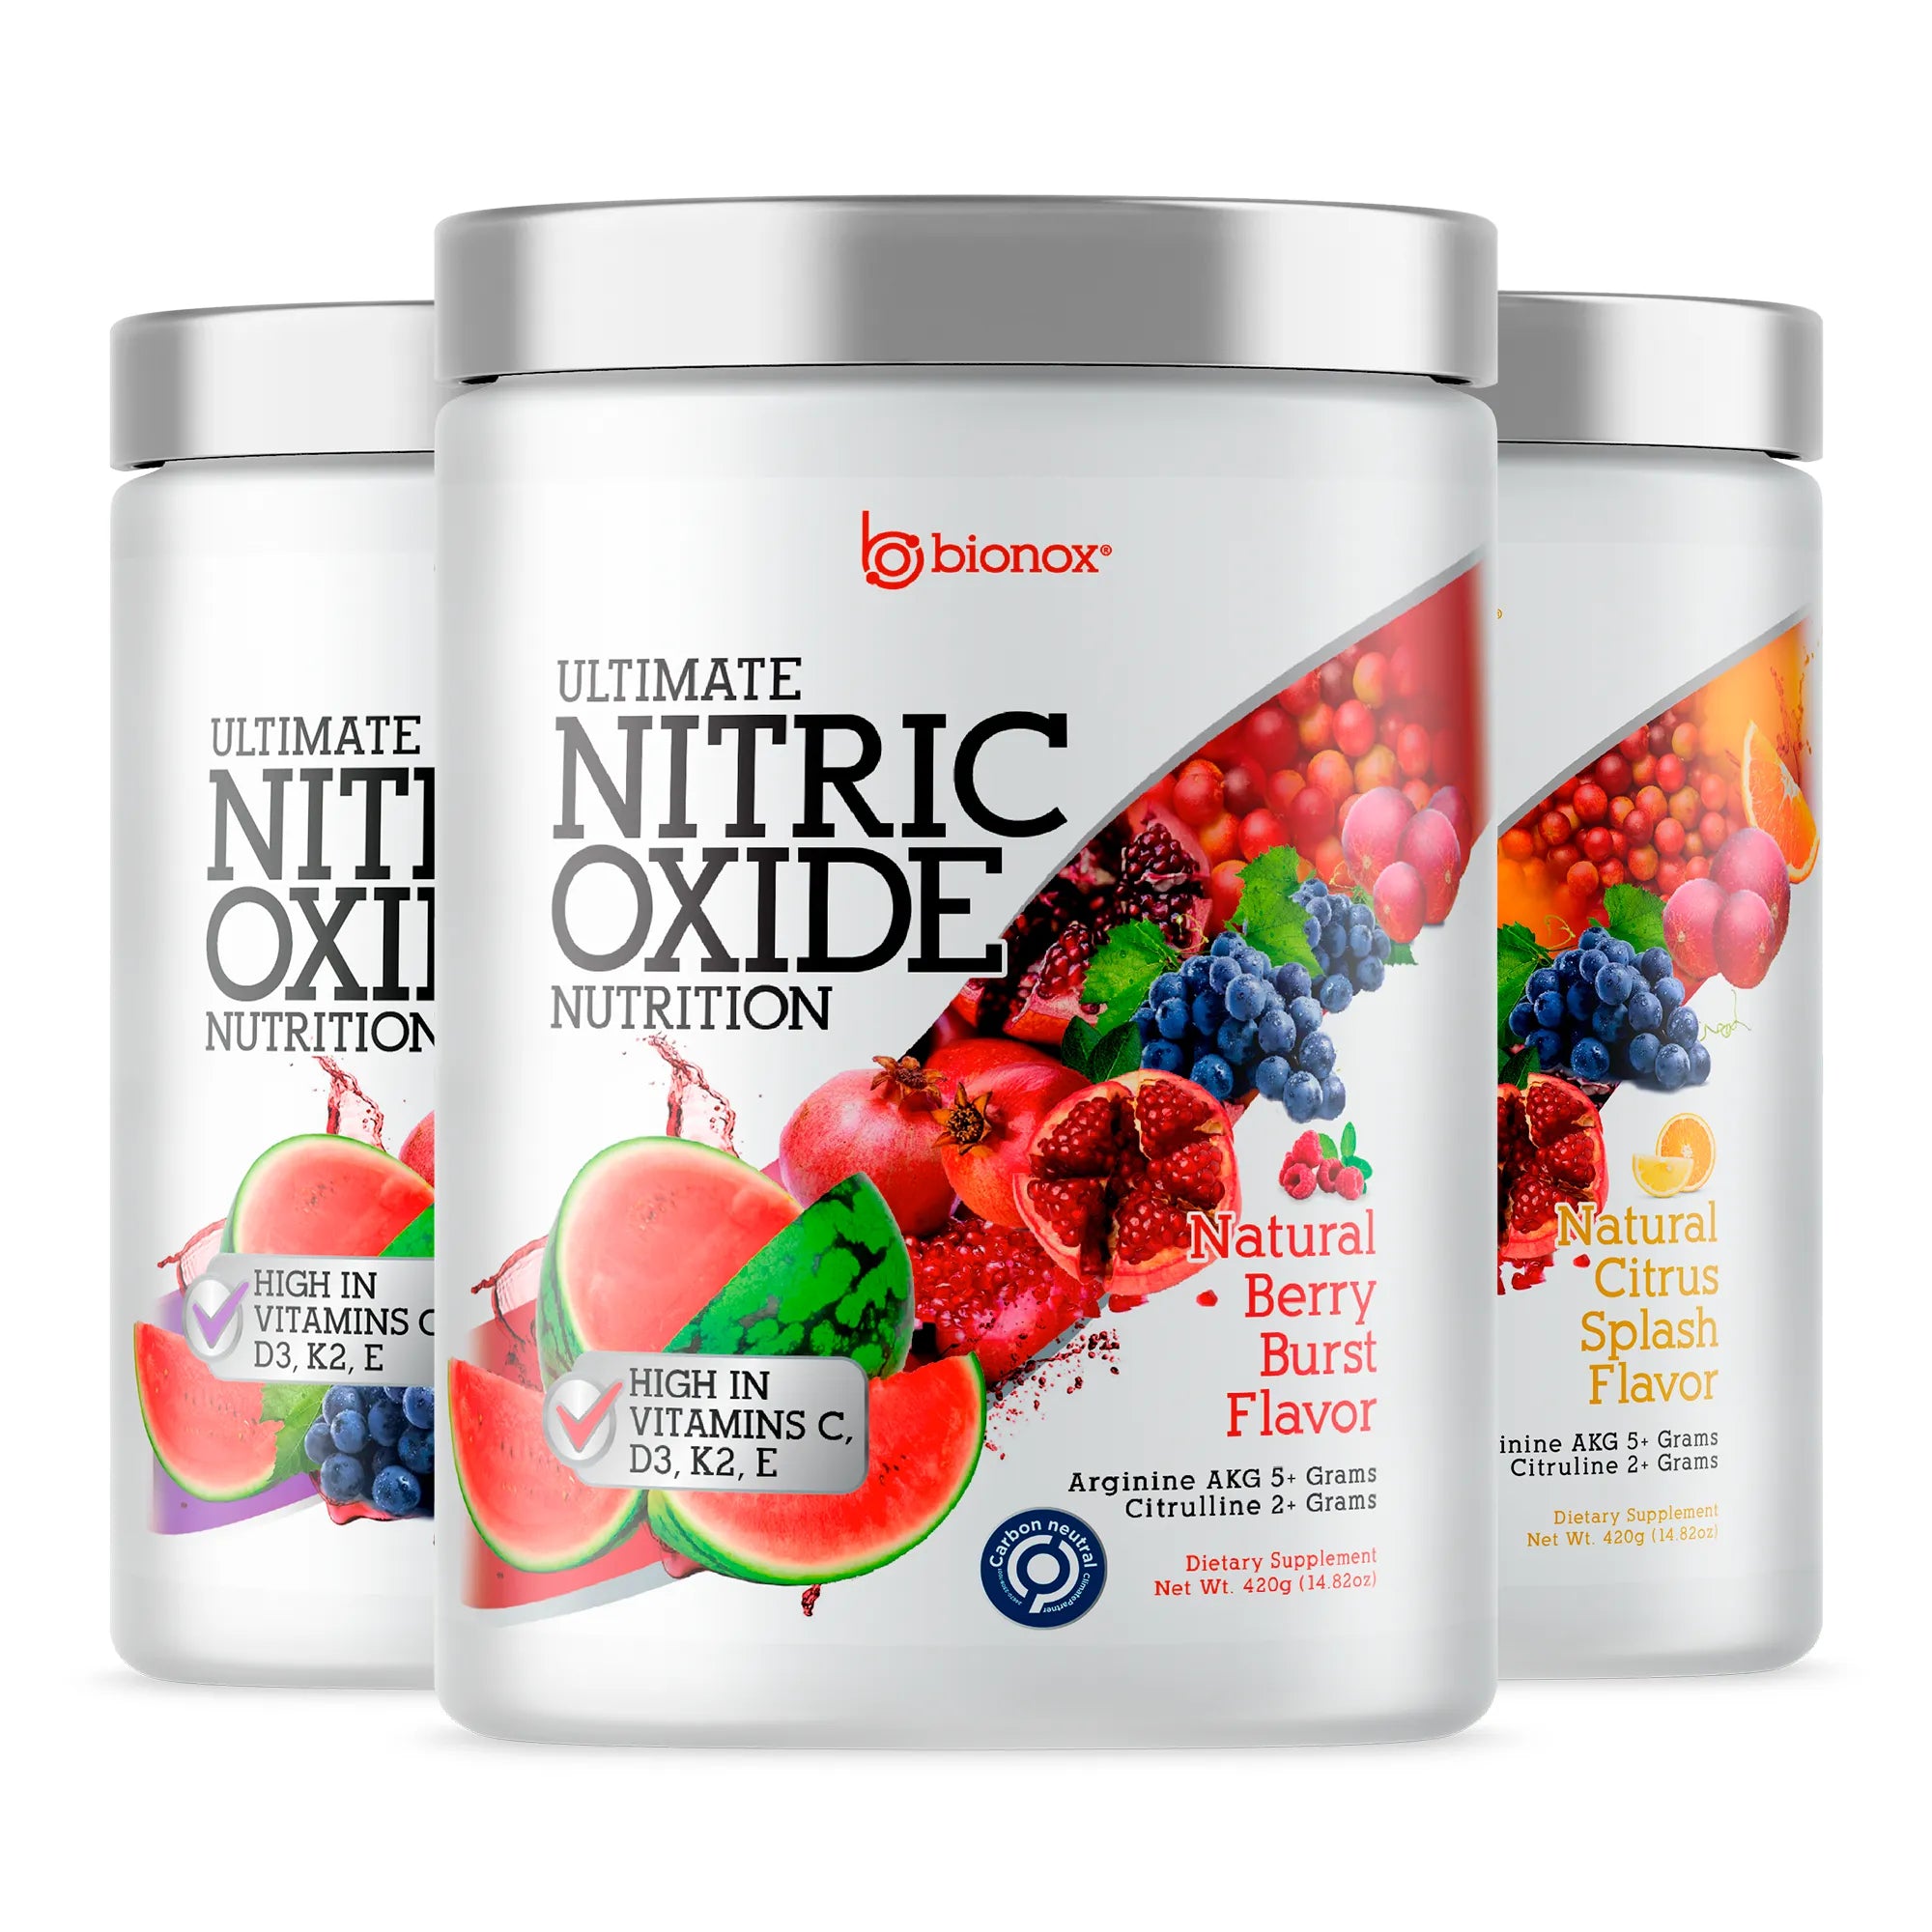 Ultimate Nitric Oxide Nutrition - Large - 30 Day Supply